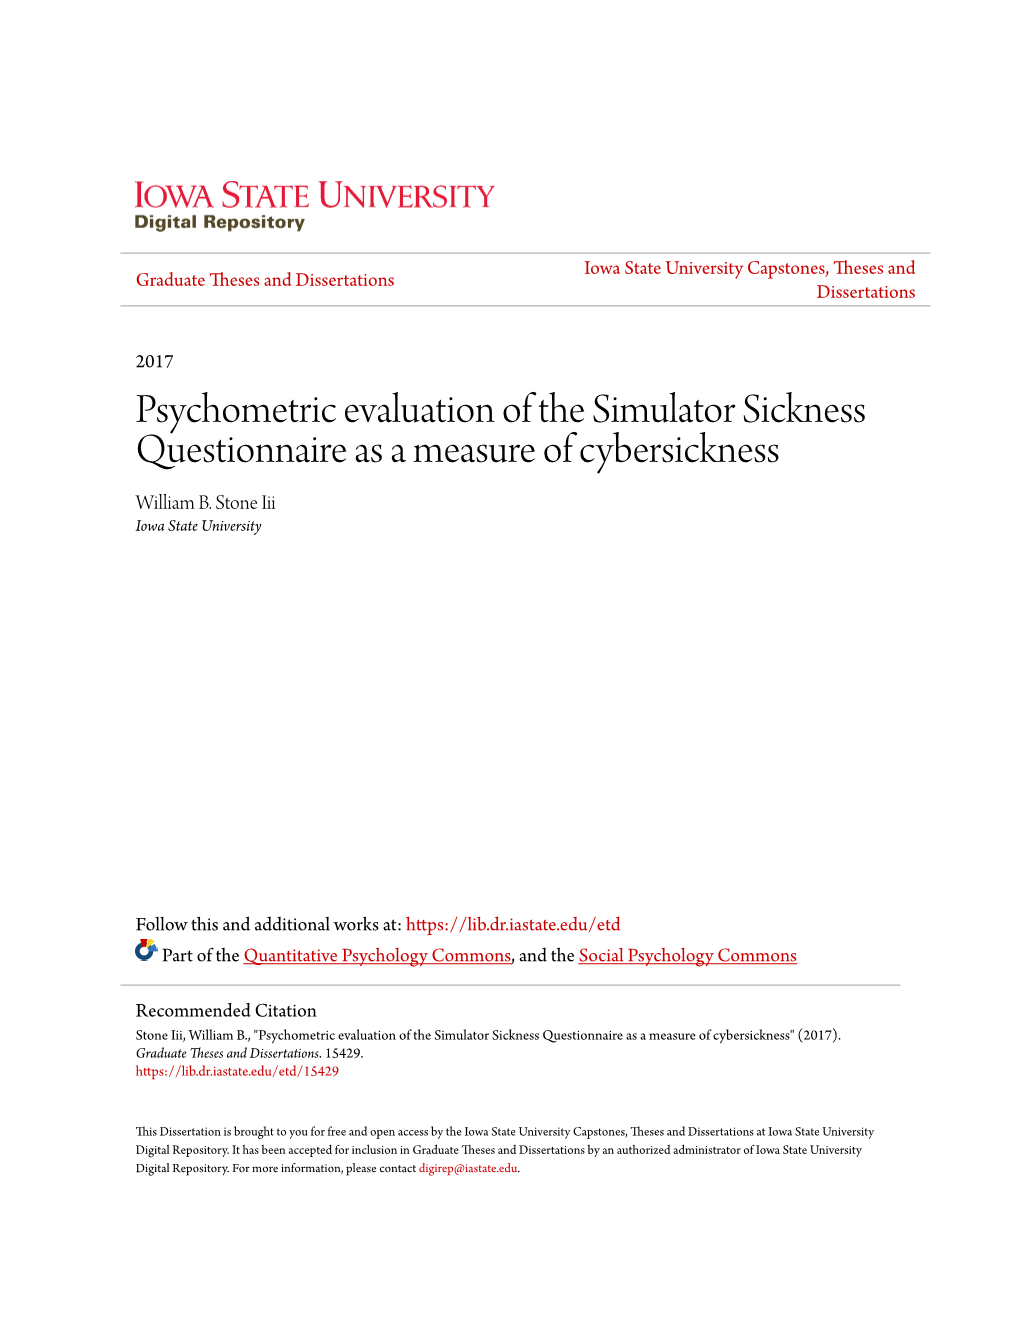 Psychometric Evaluation of the Simulator Sickness Questionnaire As a Measure of Cybersickness William B